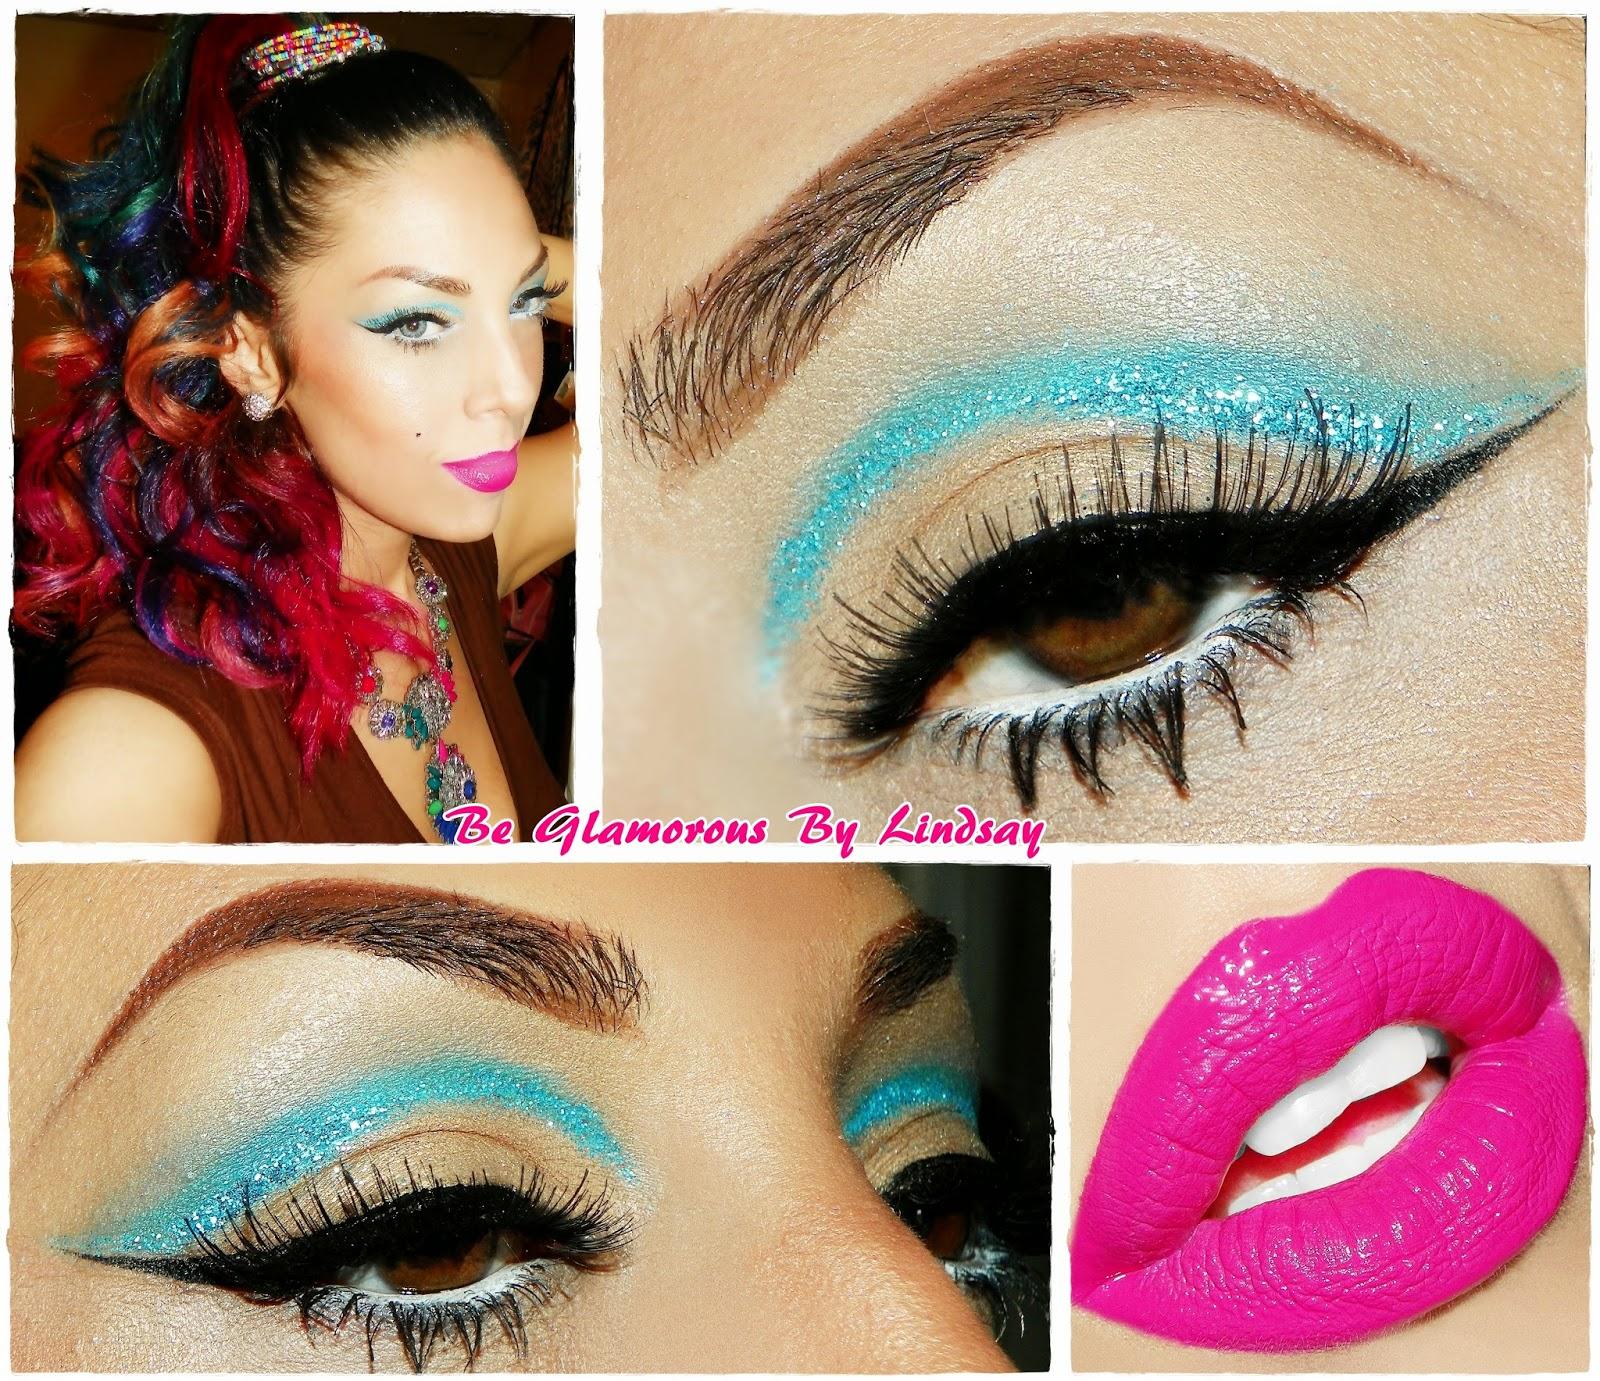 Eye Makeup For Hot Pink Lips Blue Glitter Cut Crease And Hot Pink Lips Makeup Tutorial